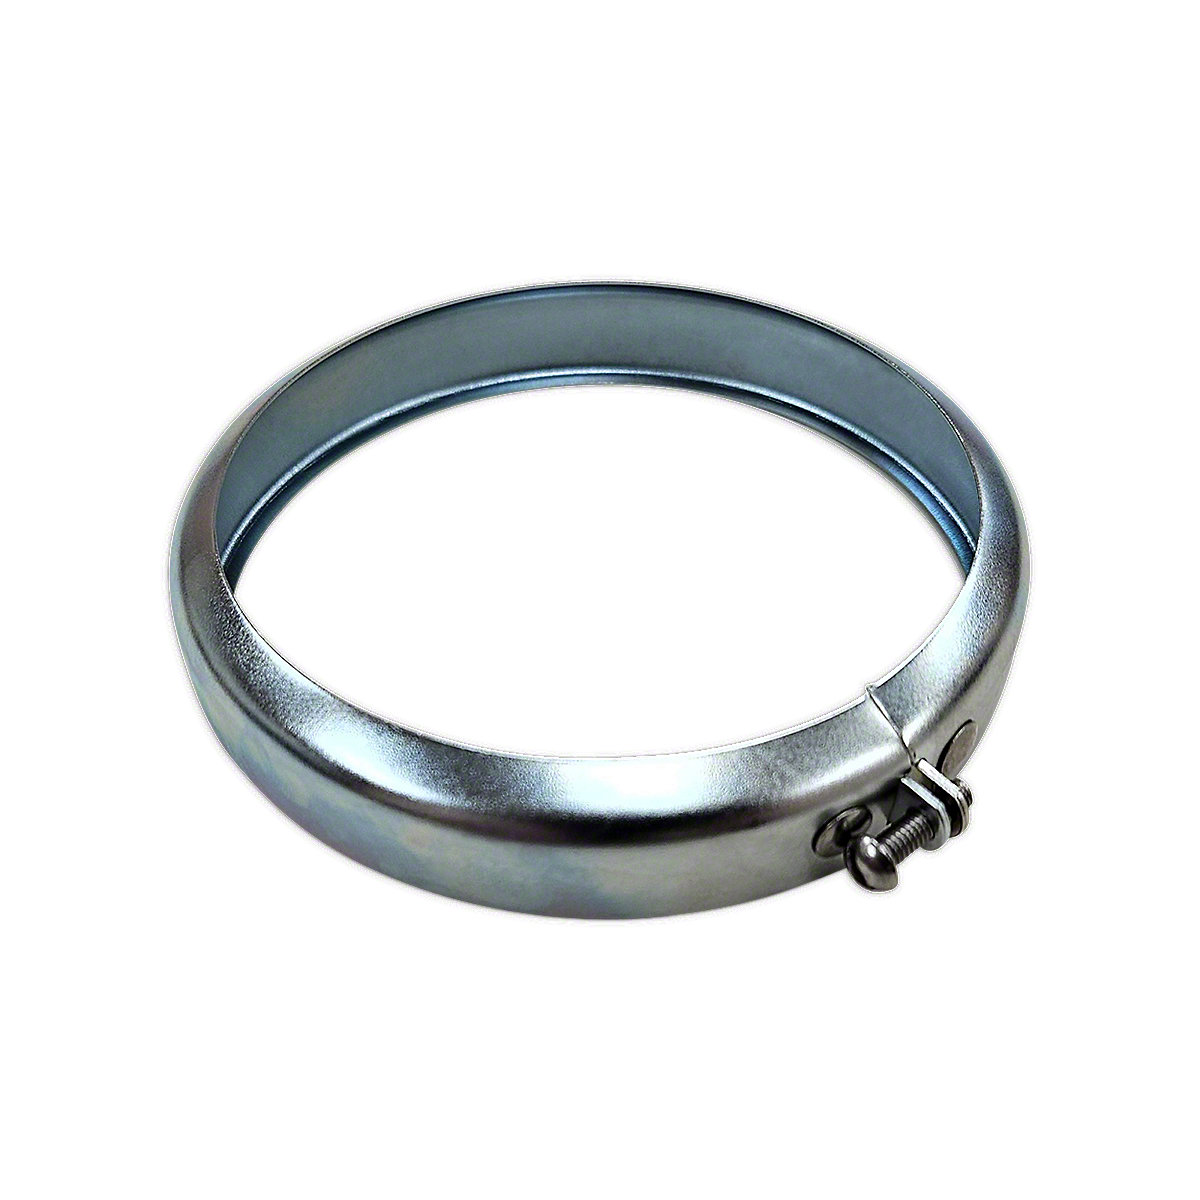 4.5 Clamp Ring With Screw -- Fits Many AC, IH, JD, Oliver & More!